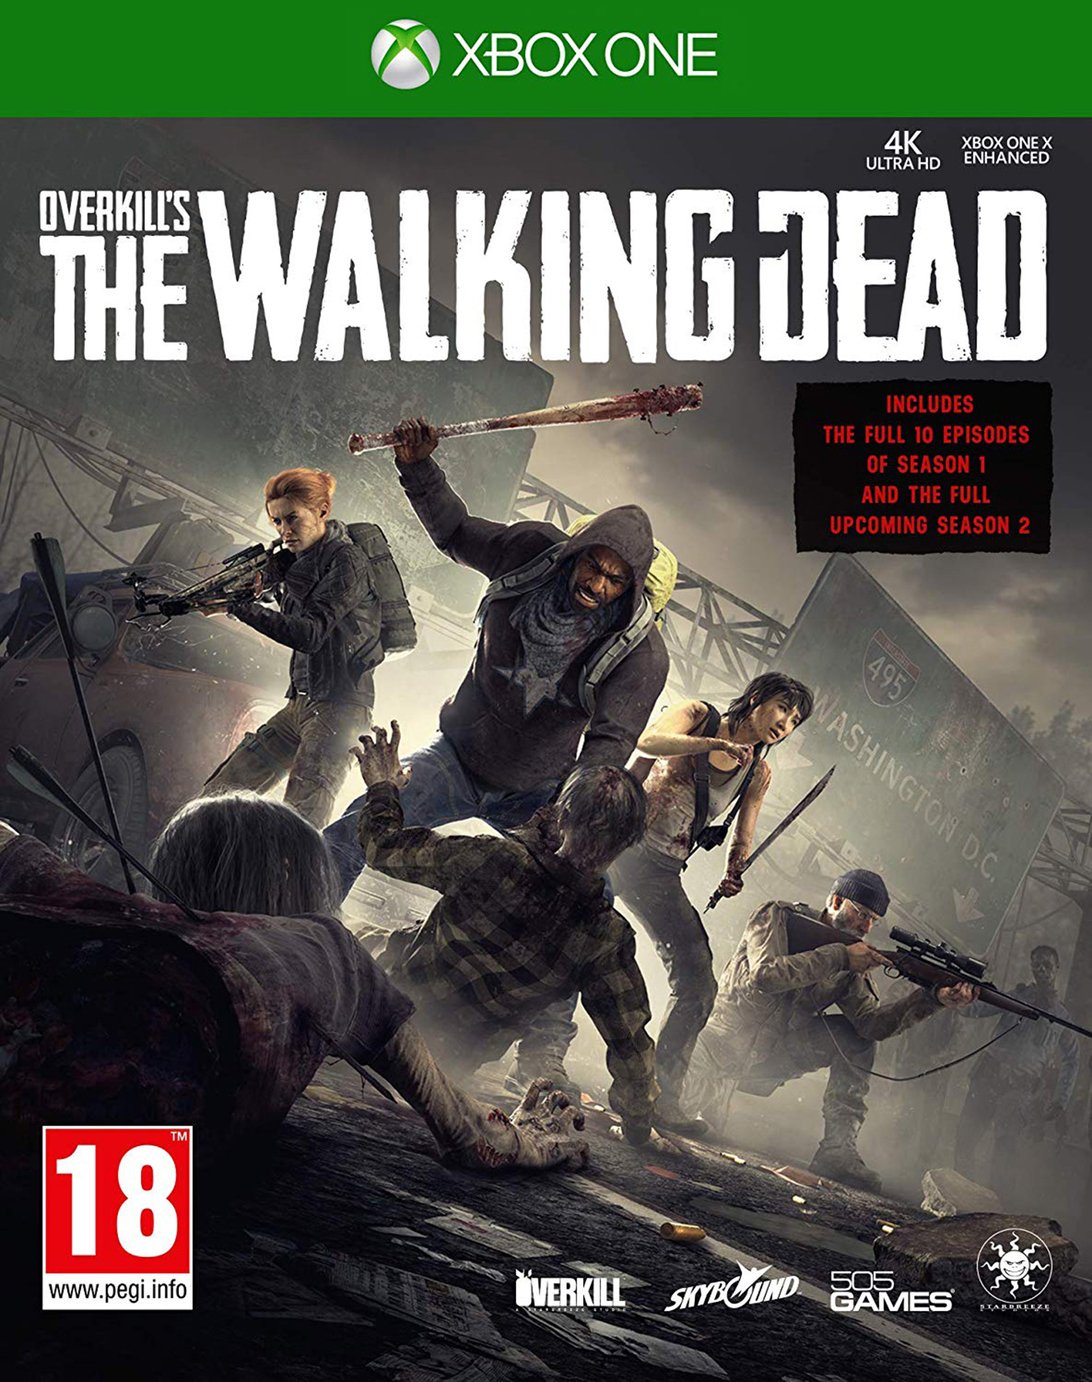 overkills-the-walking-dead-xbox-one-pre-order-game-reviews